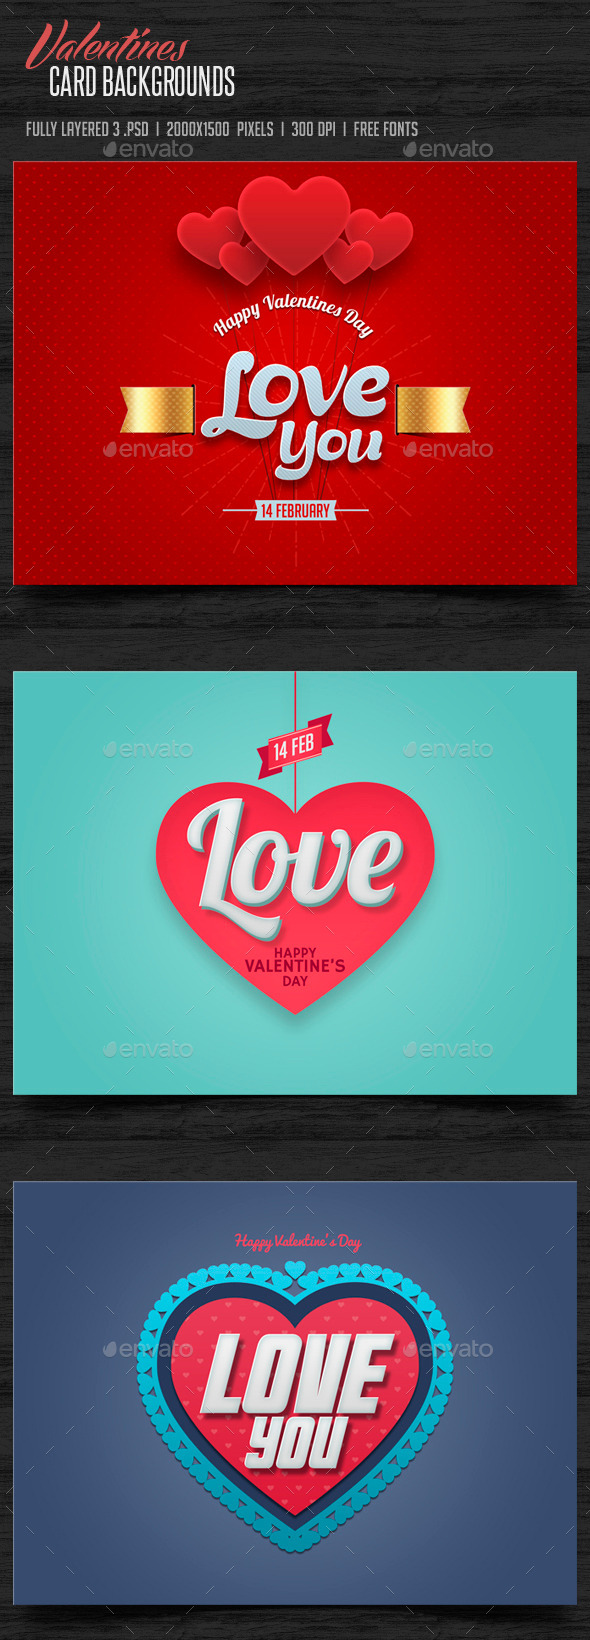 Valentines Day Cards Backgrounds